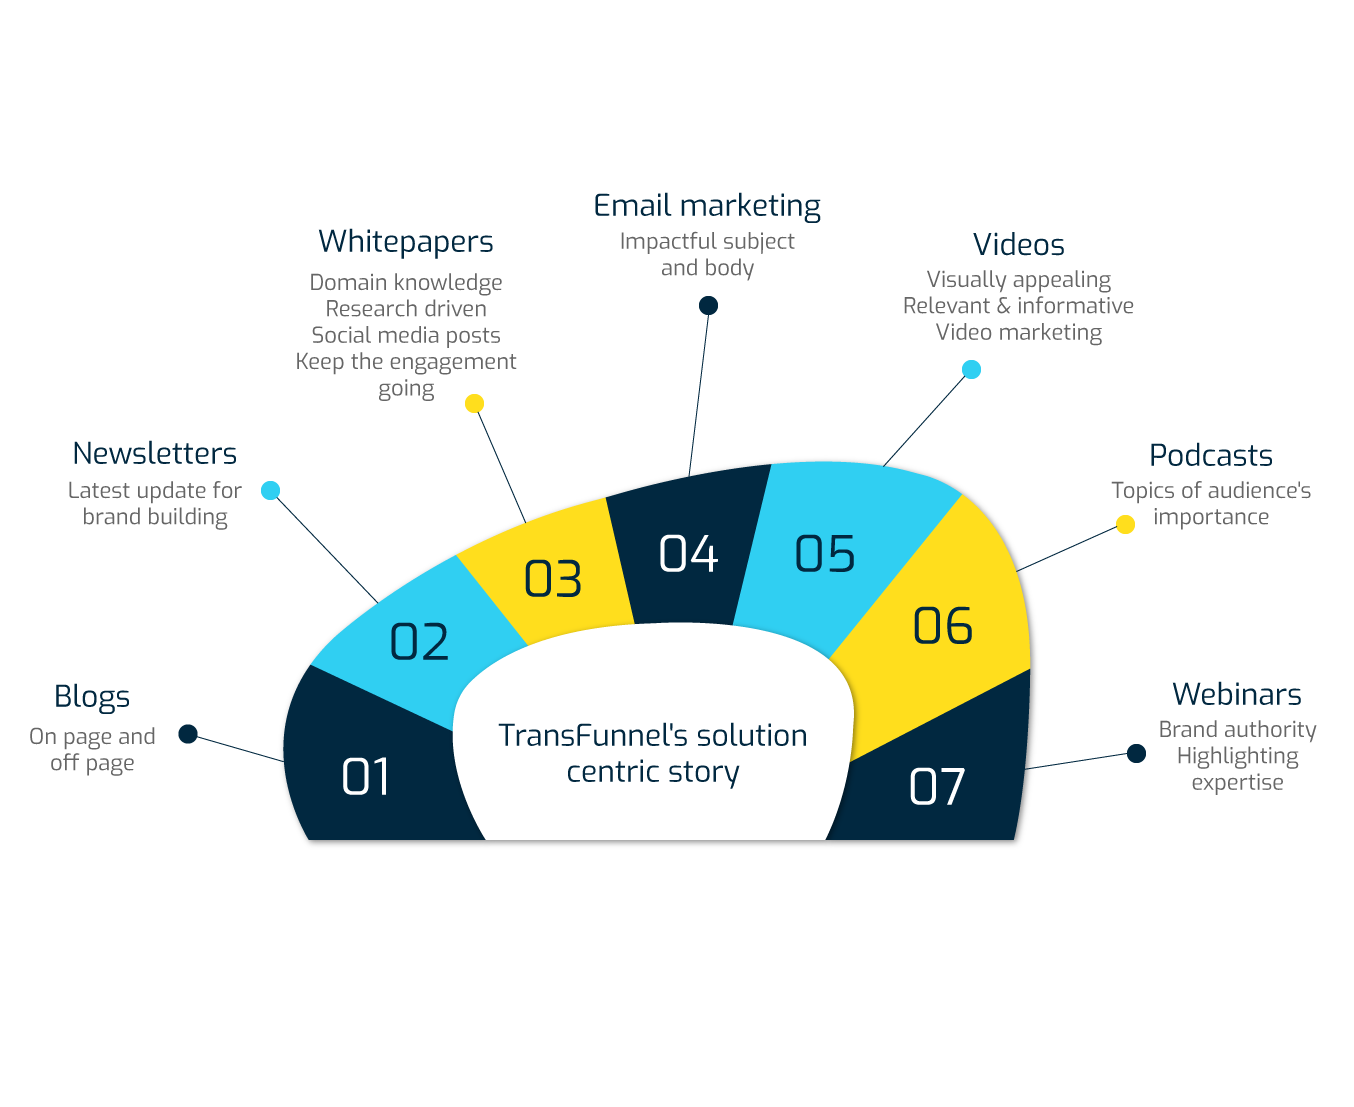 TransFunnel's solution-centric story